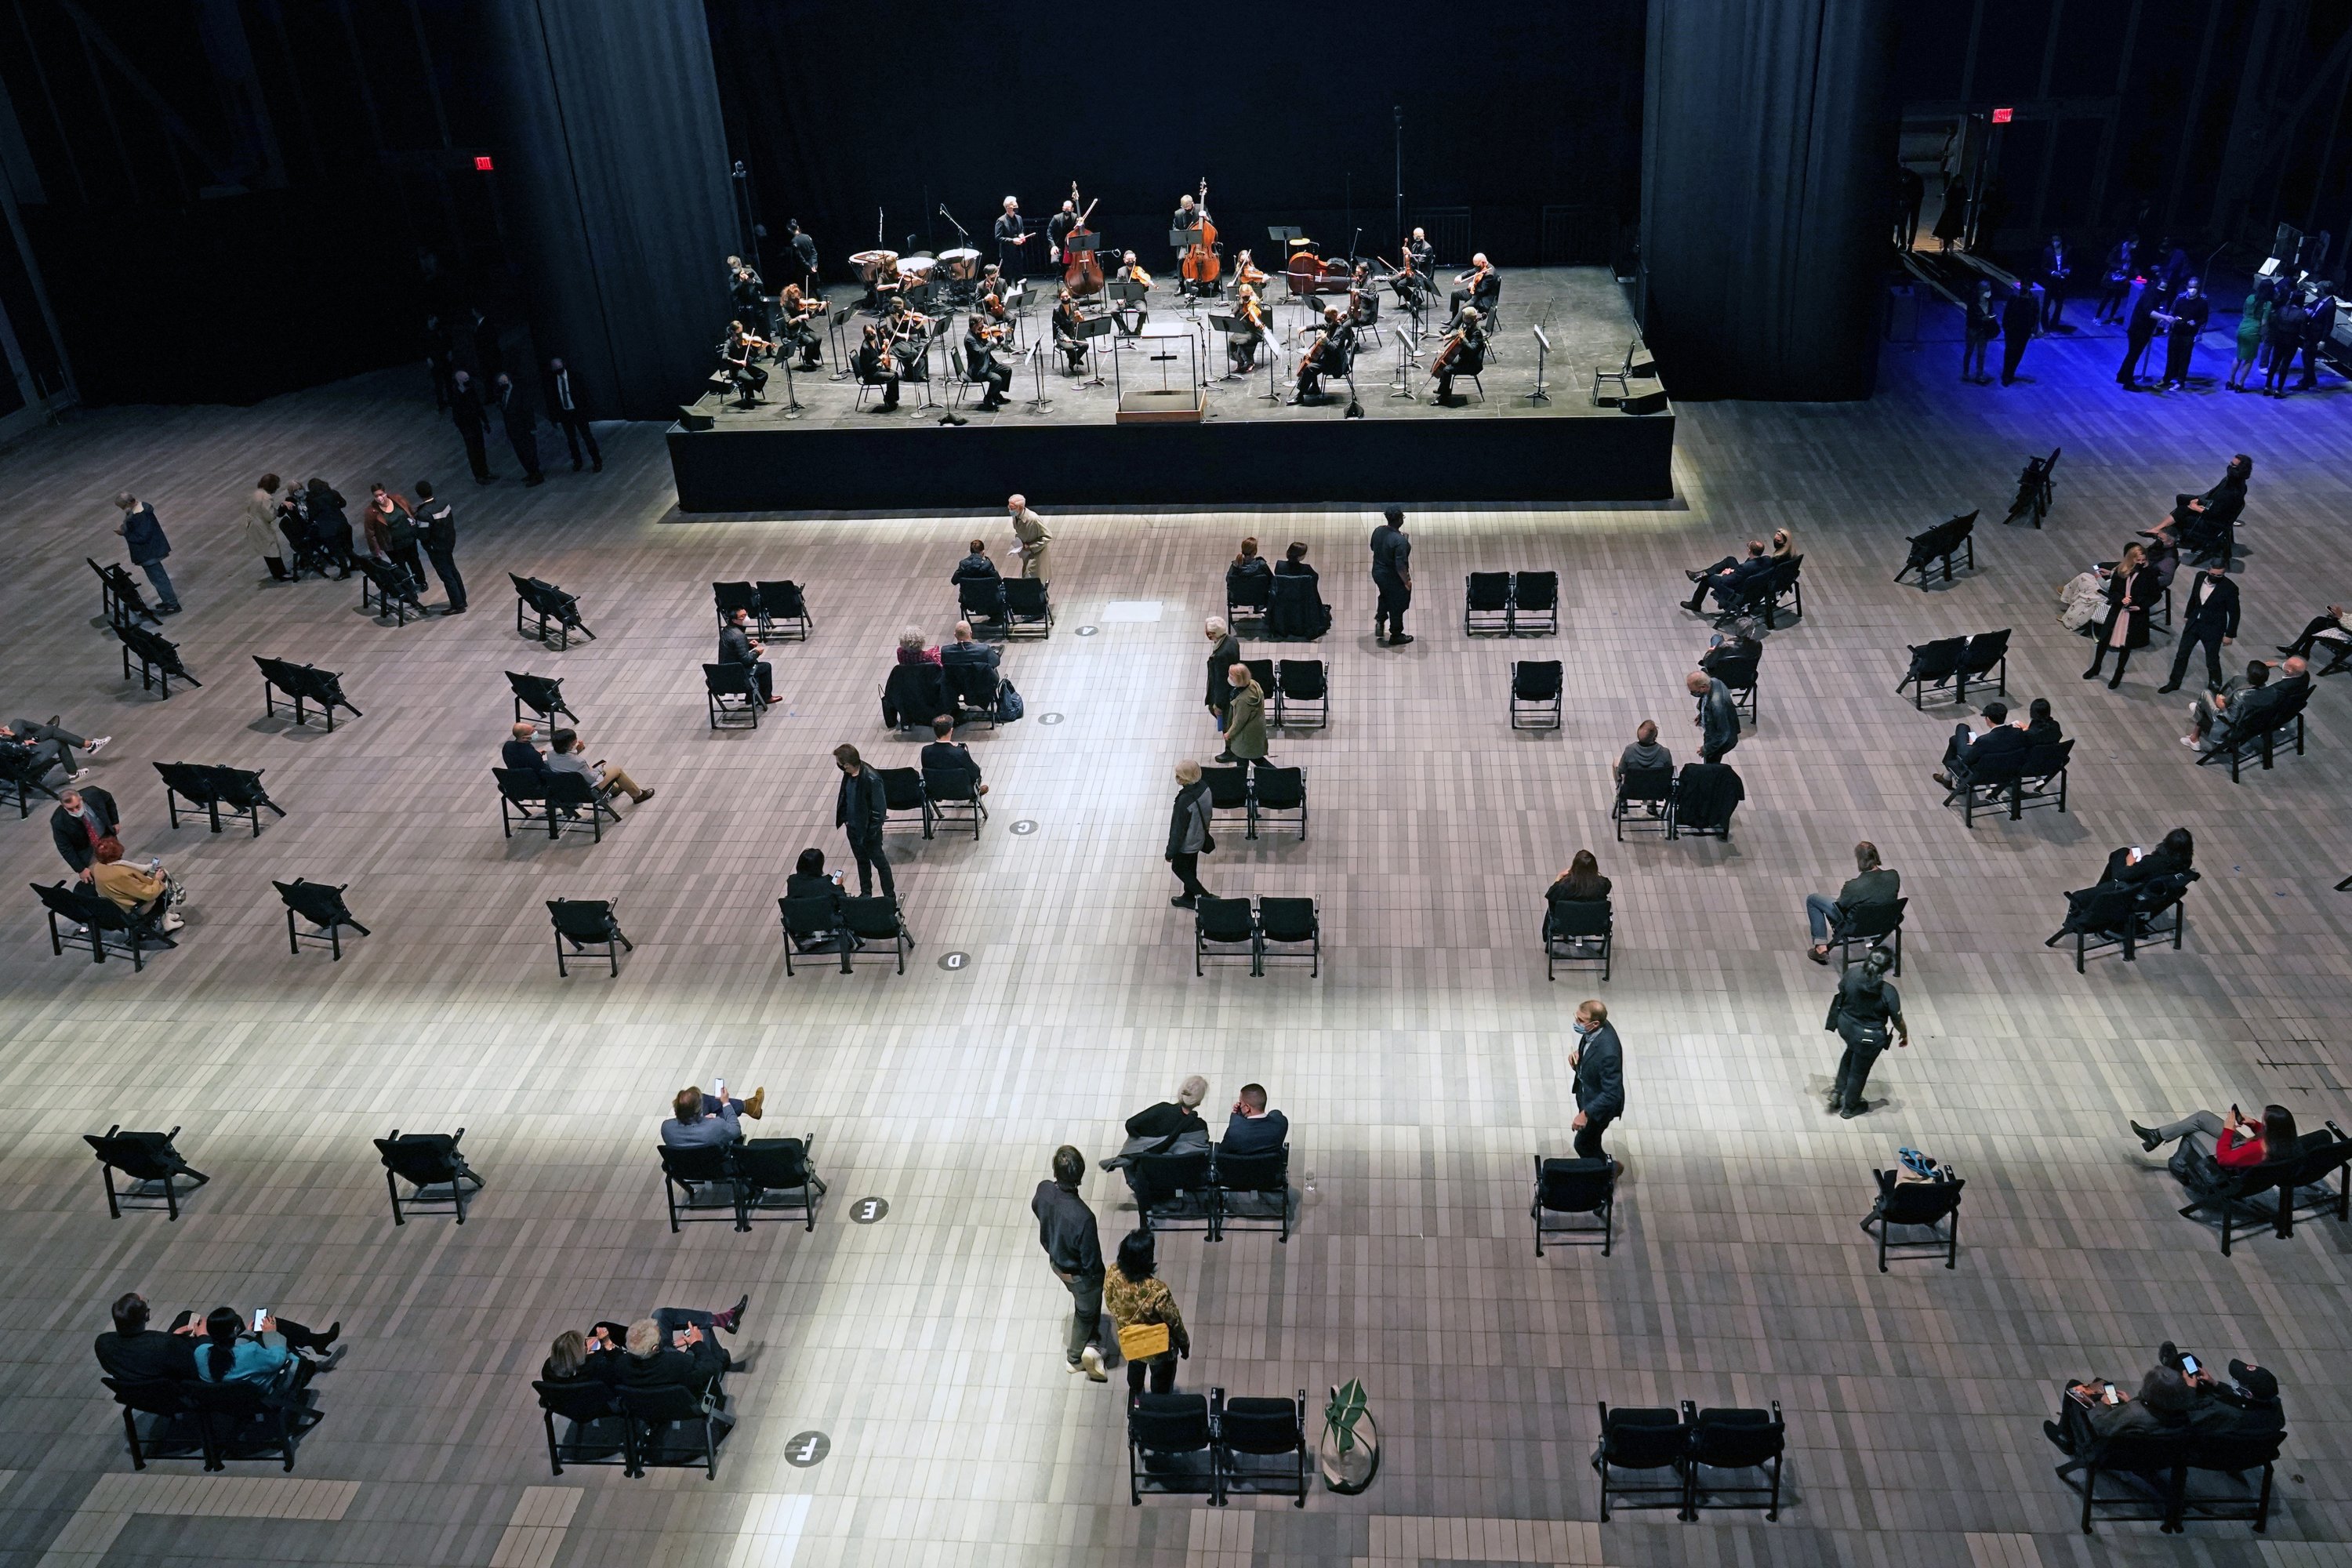 Concertgoers take their seats before a live performance of the New York Philharmonic, which performed for the first time since March 10, 2020, at The Shed in Hudson Yards, New York, U.S., Wednesday, April 14, 2021. (AP Photo)